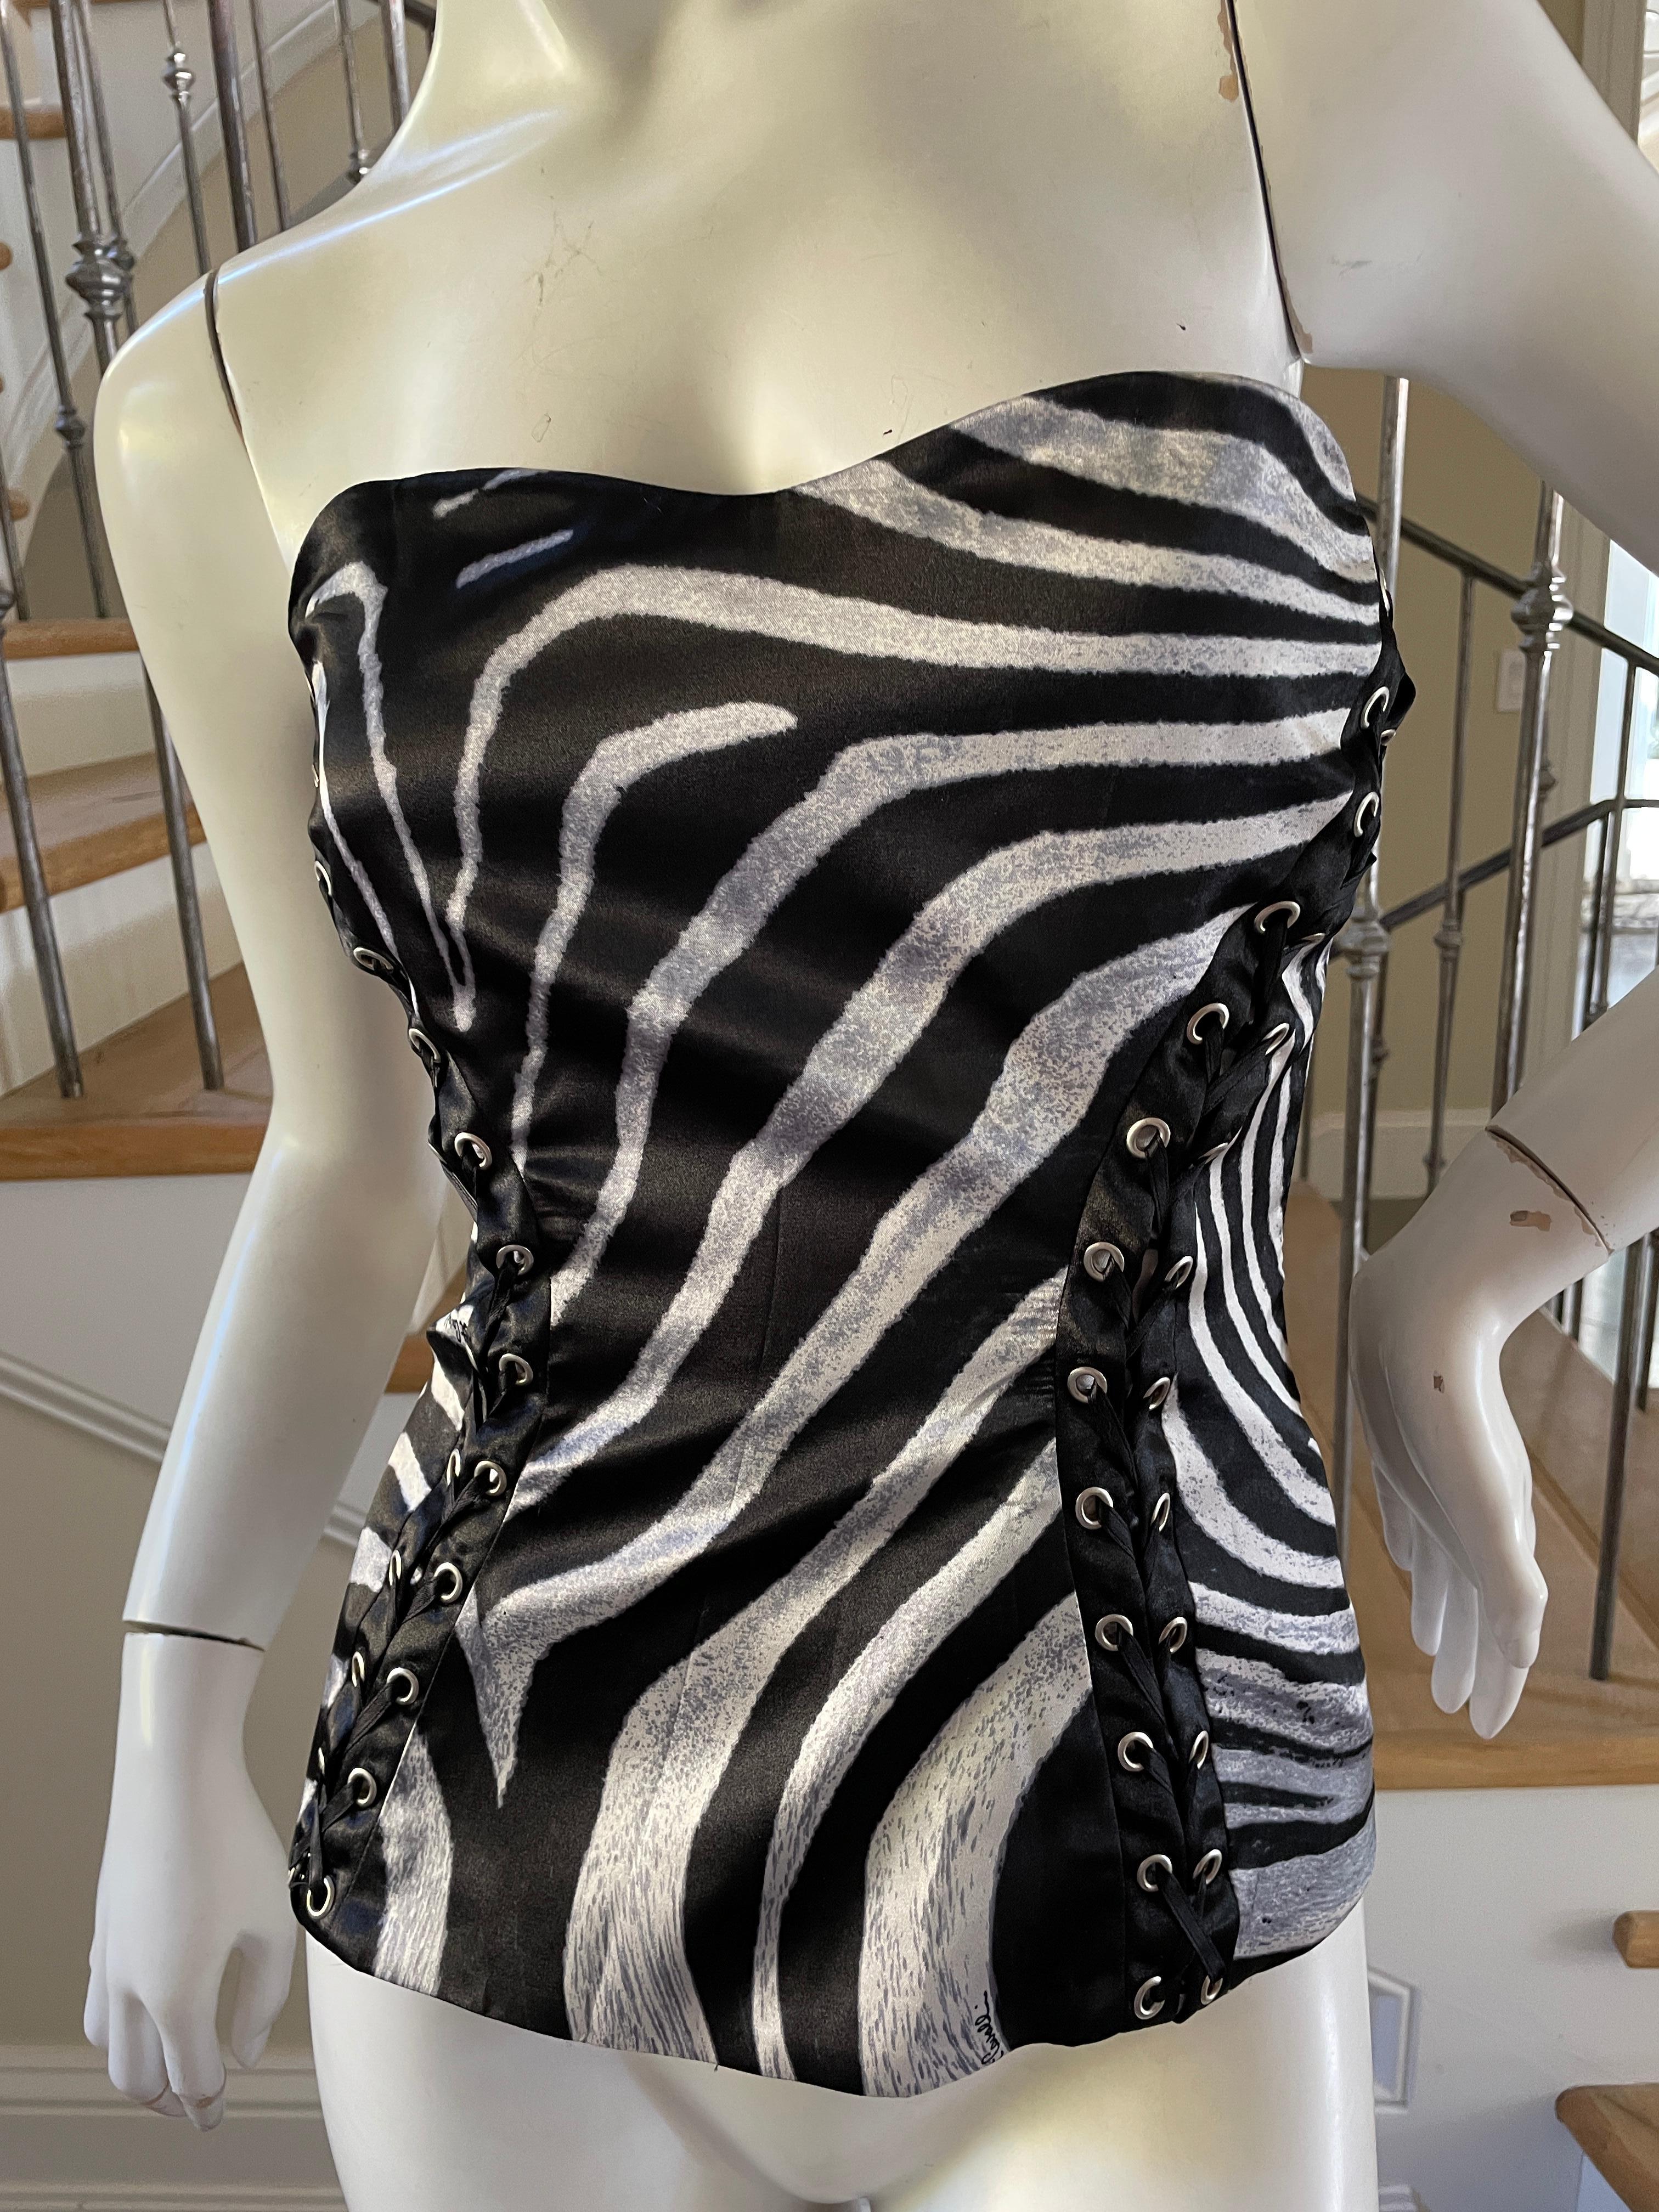 Roberto Cavalli for Just Cavalli Zebra Print Corset with Lace Up Details 
Wonderful piece , front and back.
Size 38
Bust 30